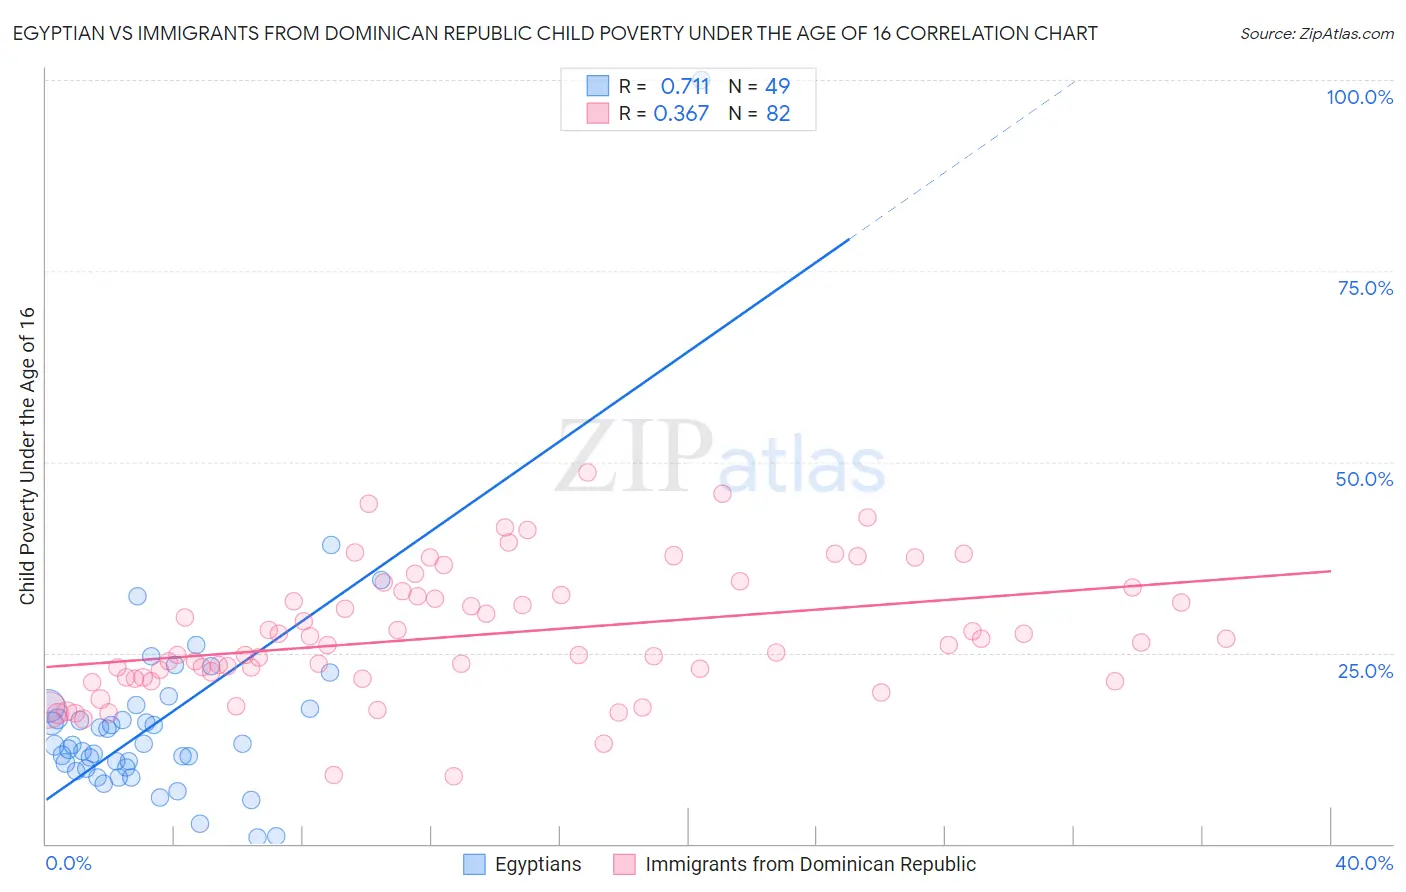 Egyptian vs Immigrants from Dominican Republic Child Poverty Under the Age of 16